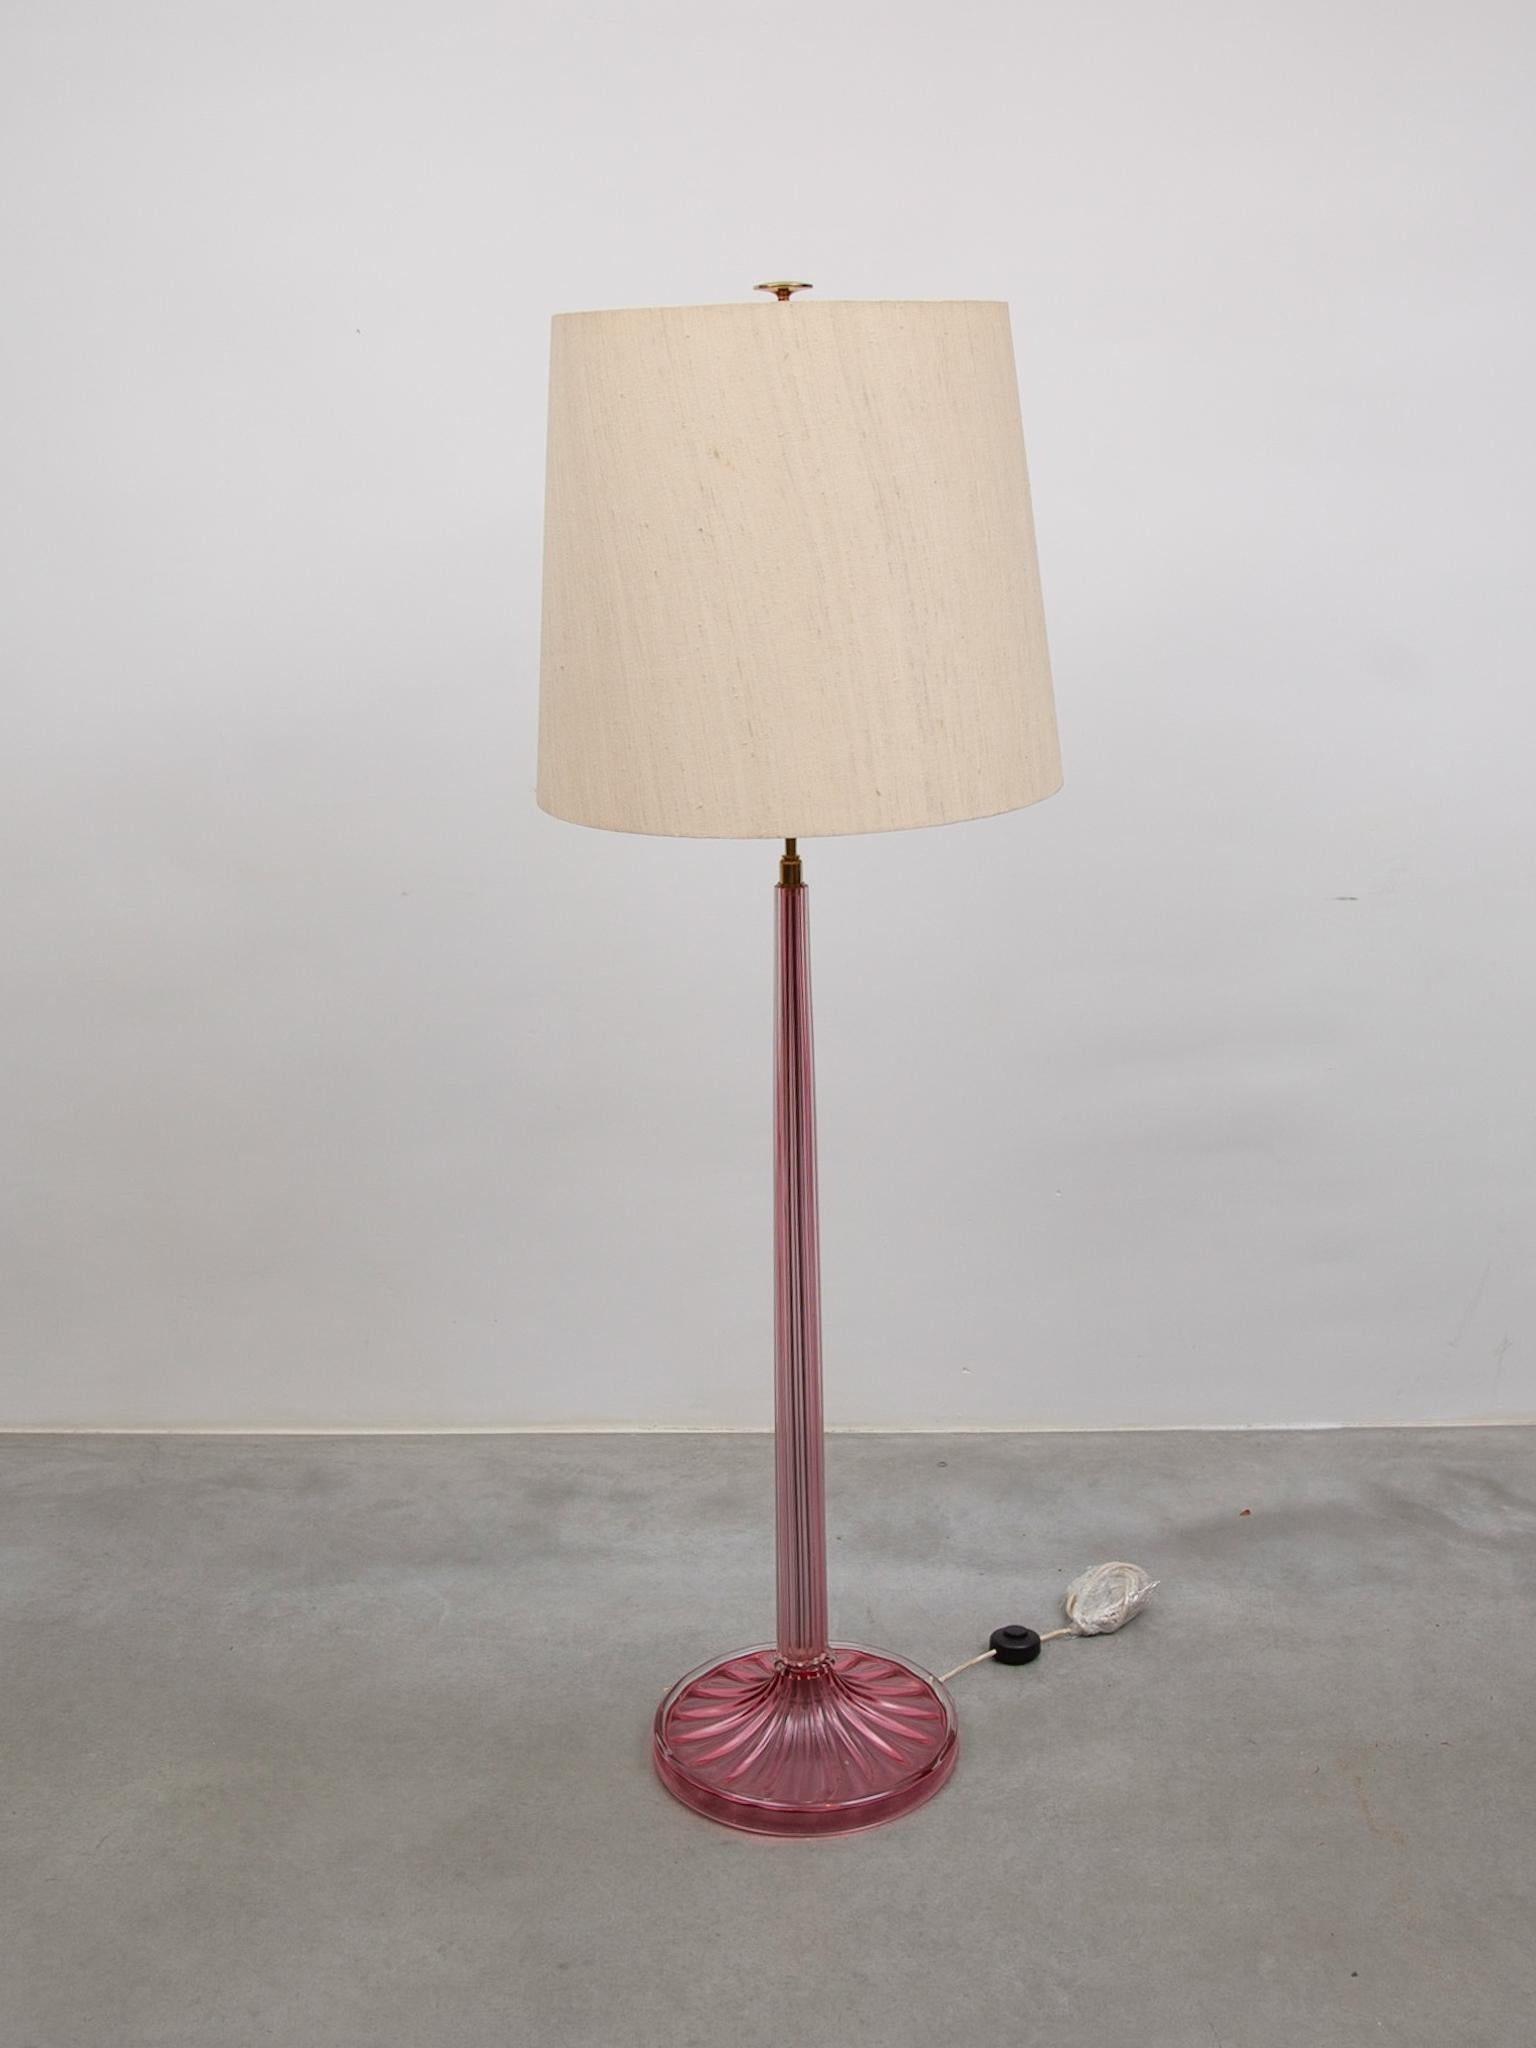 Hand-Crafted Barovier e Tosso Pink Art Glass Floor Lamp, Murano Blown Glass, 1950s, Italy For Sale